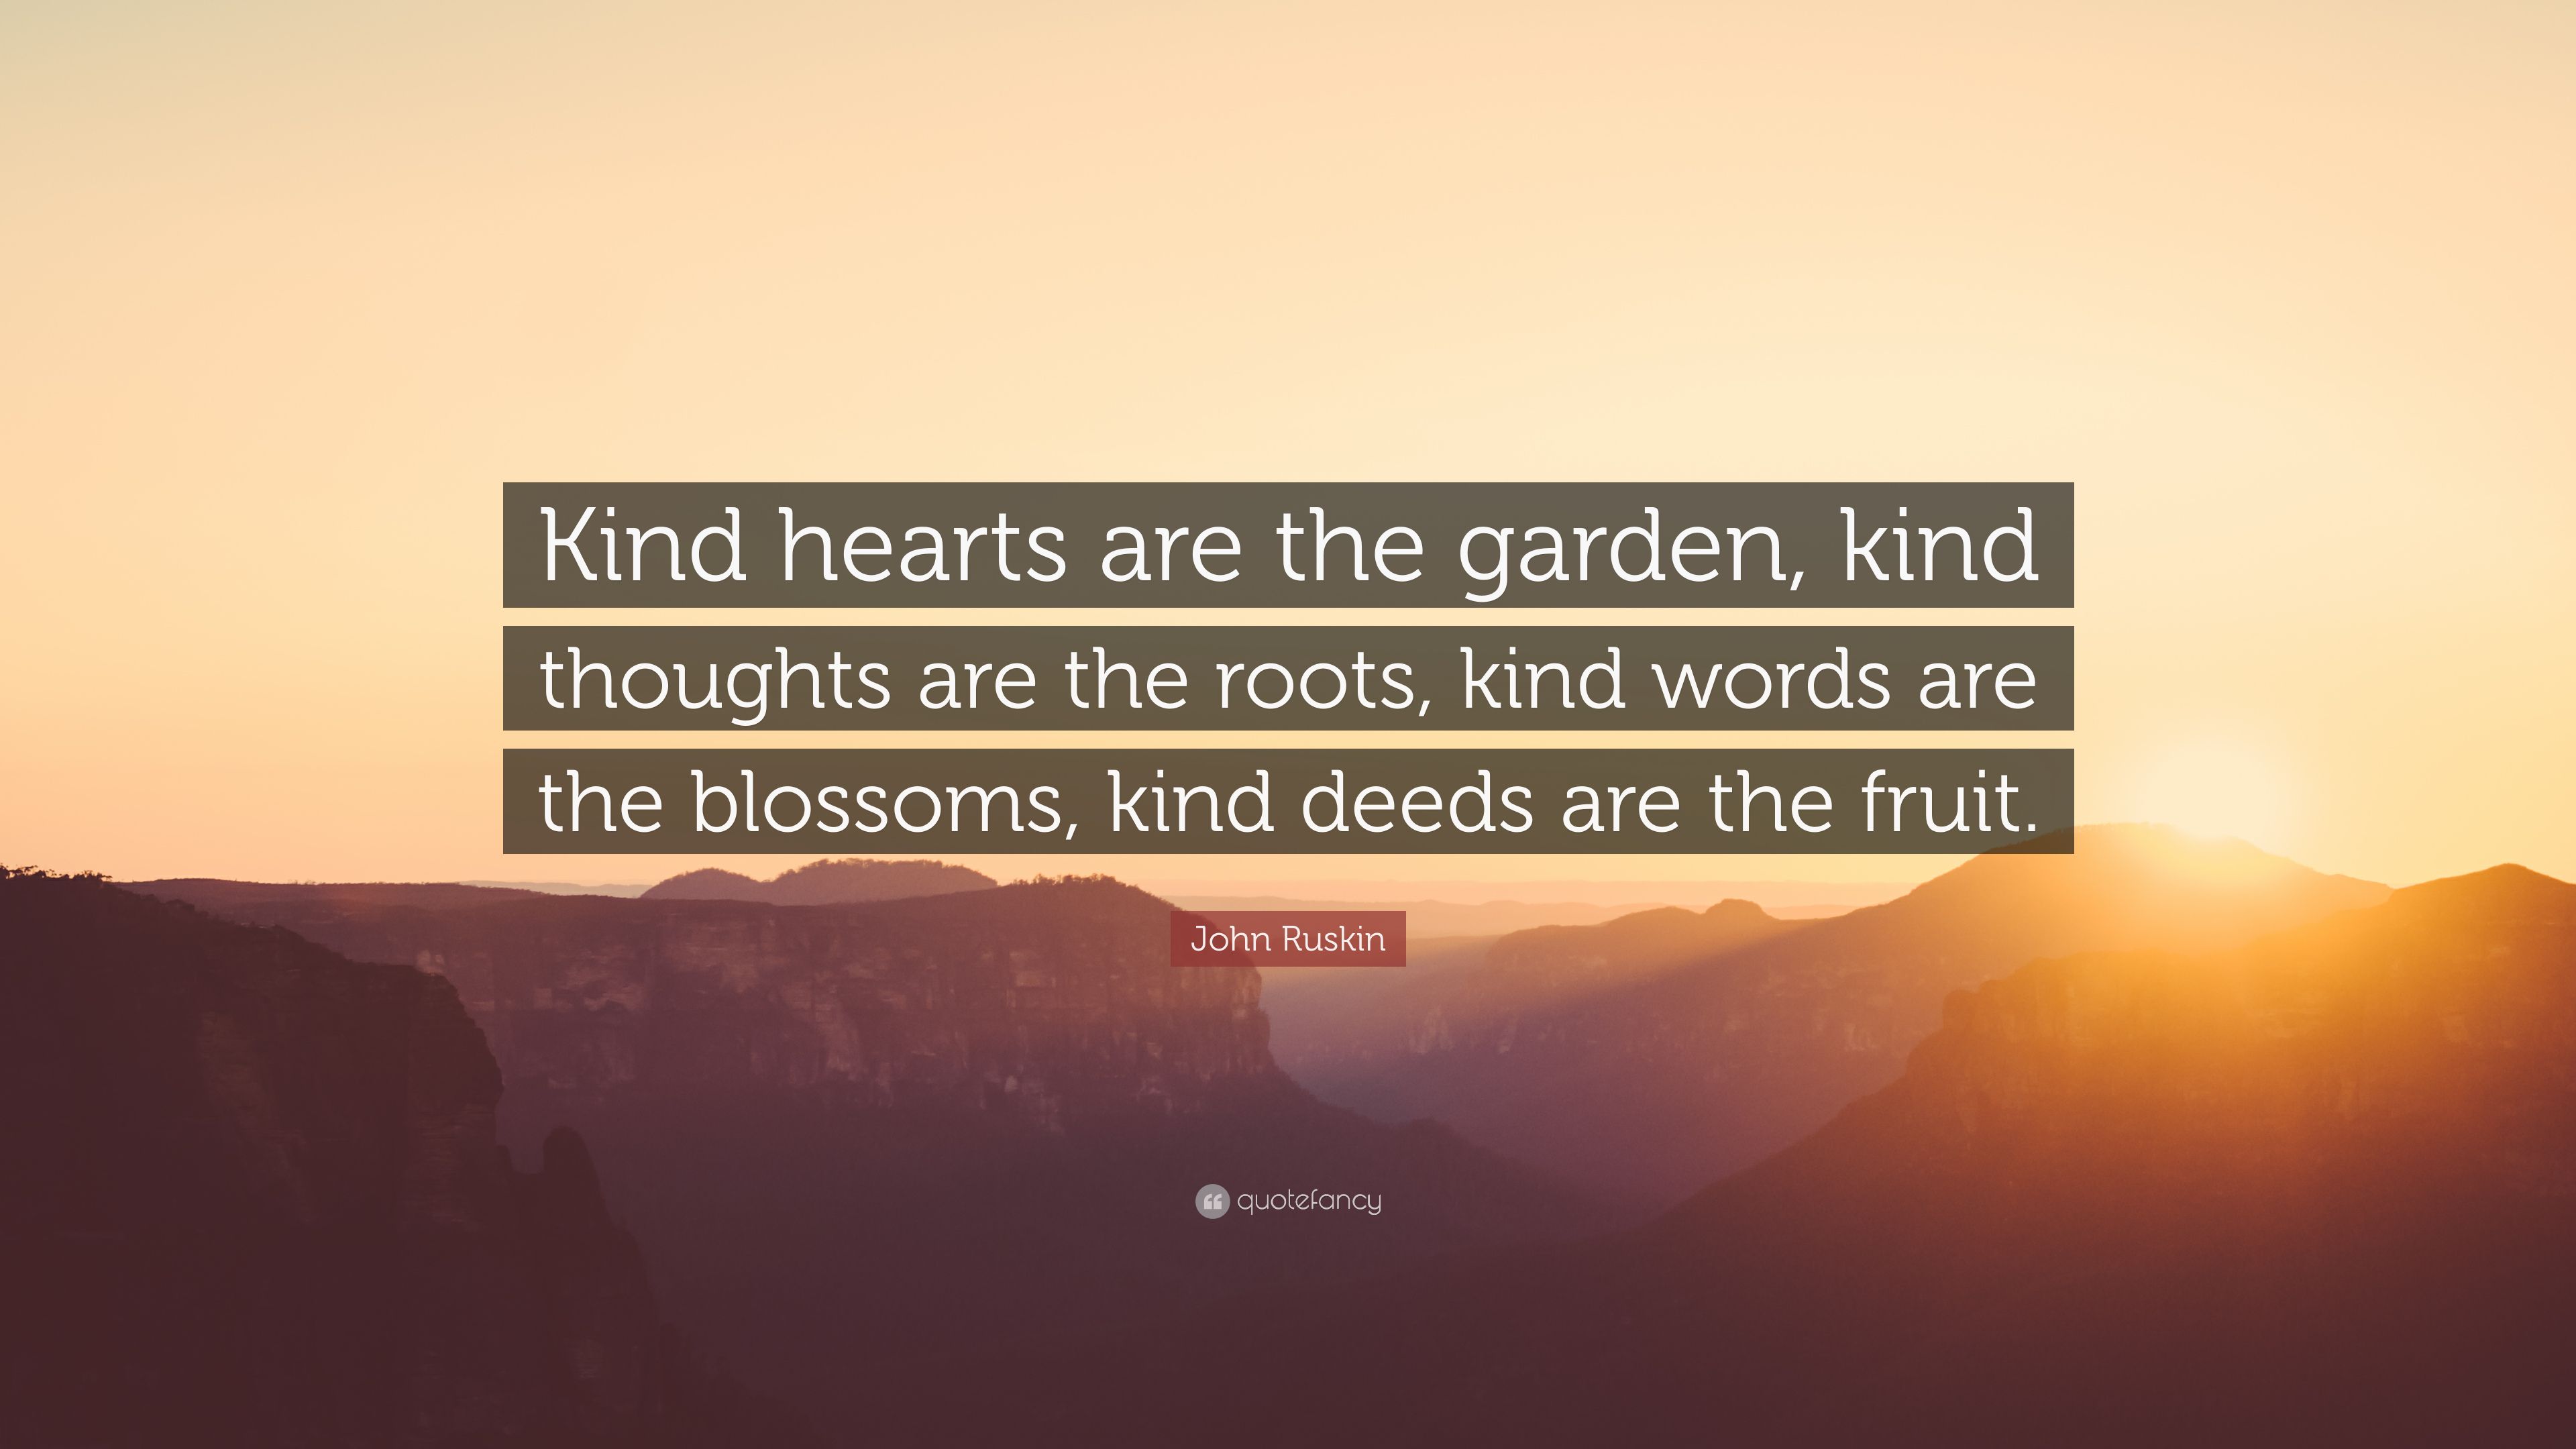 John Ruskin Quote: “Kind hearts are the garden, kind thoughts are